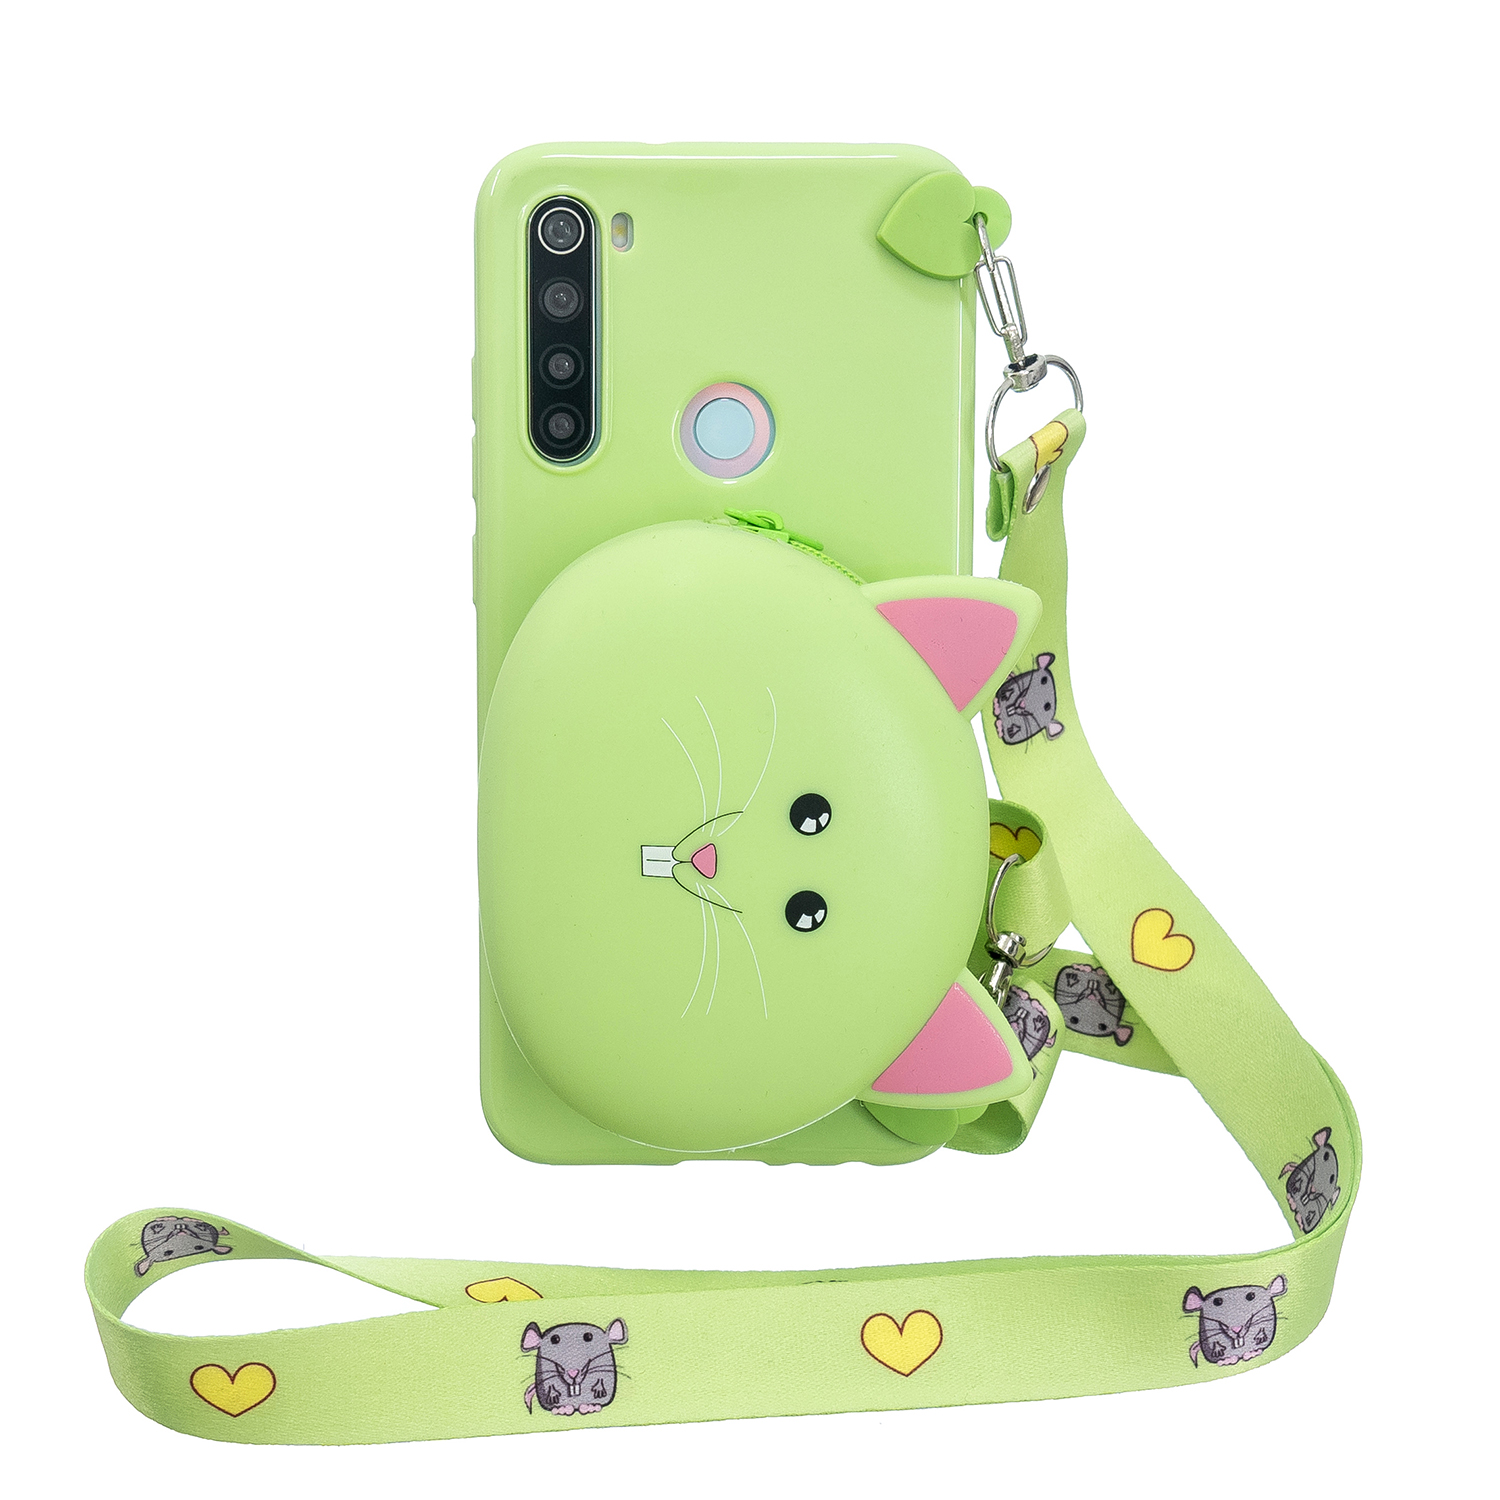 For Redmi Note 8/8T/8 Pro Cellphone Case Mobile Phone Shell Shockproof TPU Cover with Cartoon Cat Pig Panda Coin Purse Lovely Shoulder Starp  Green